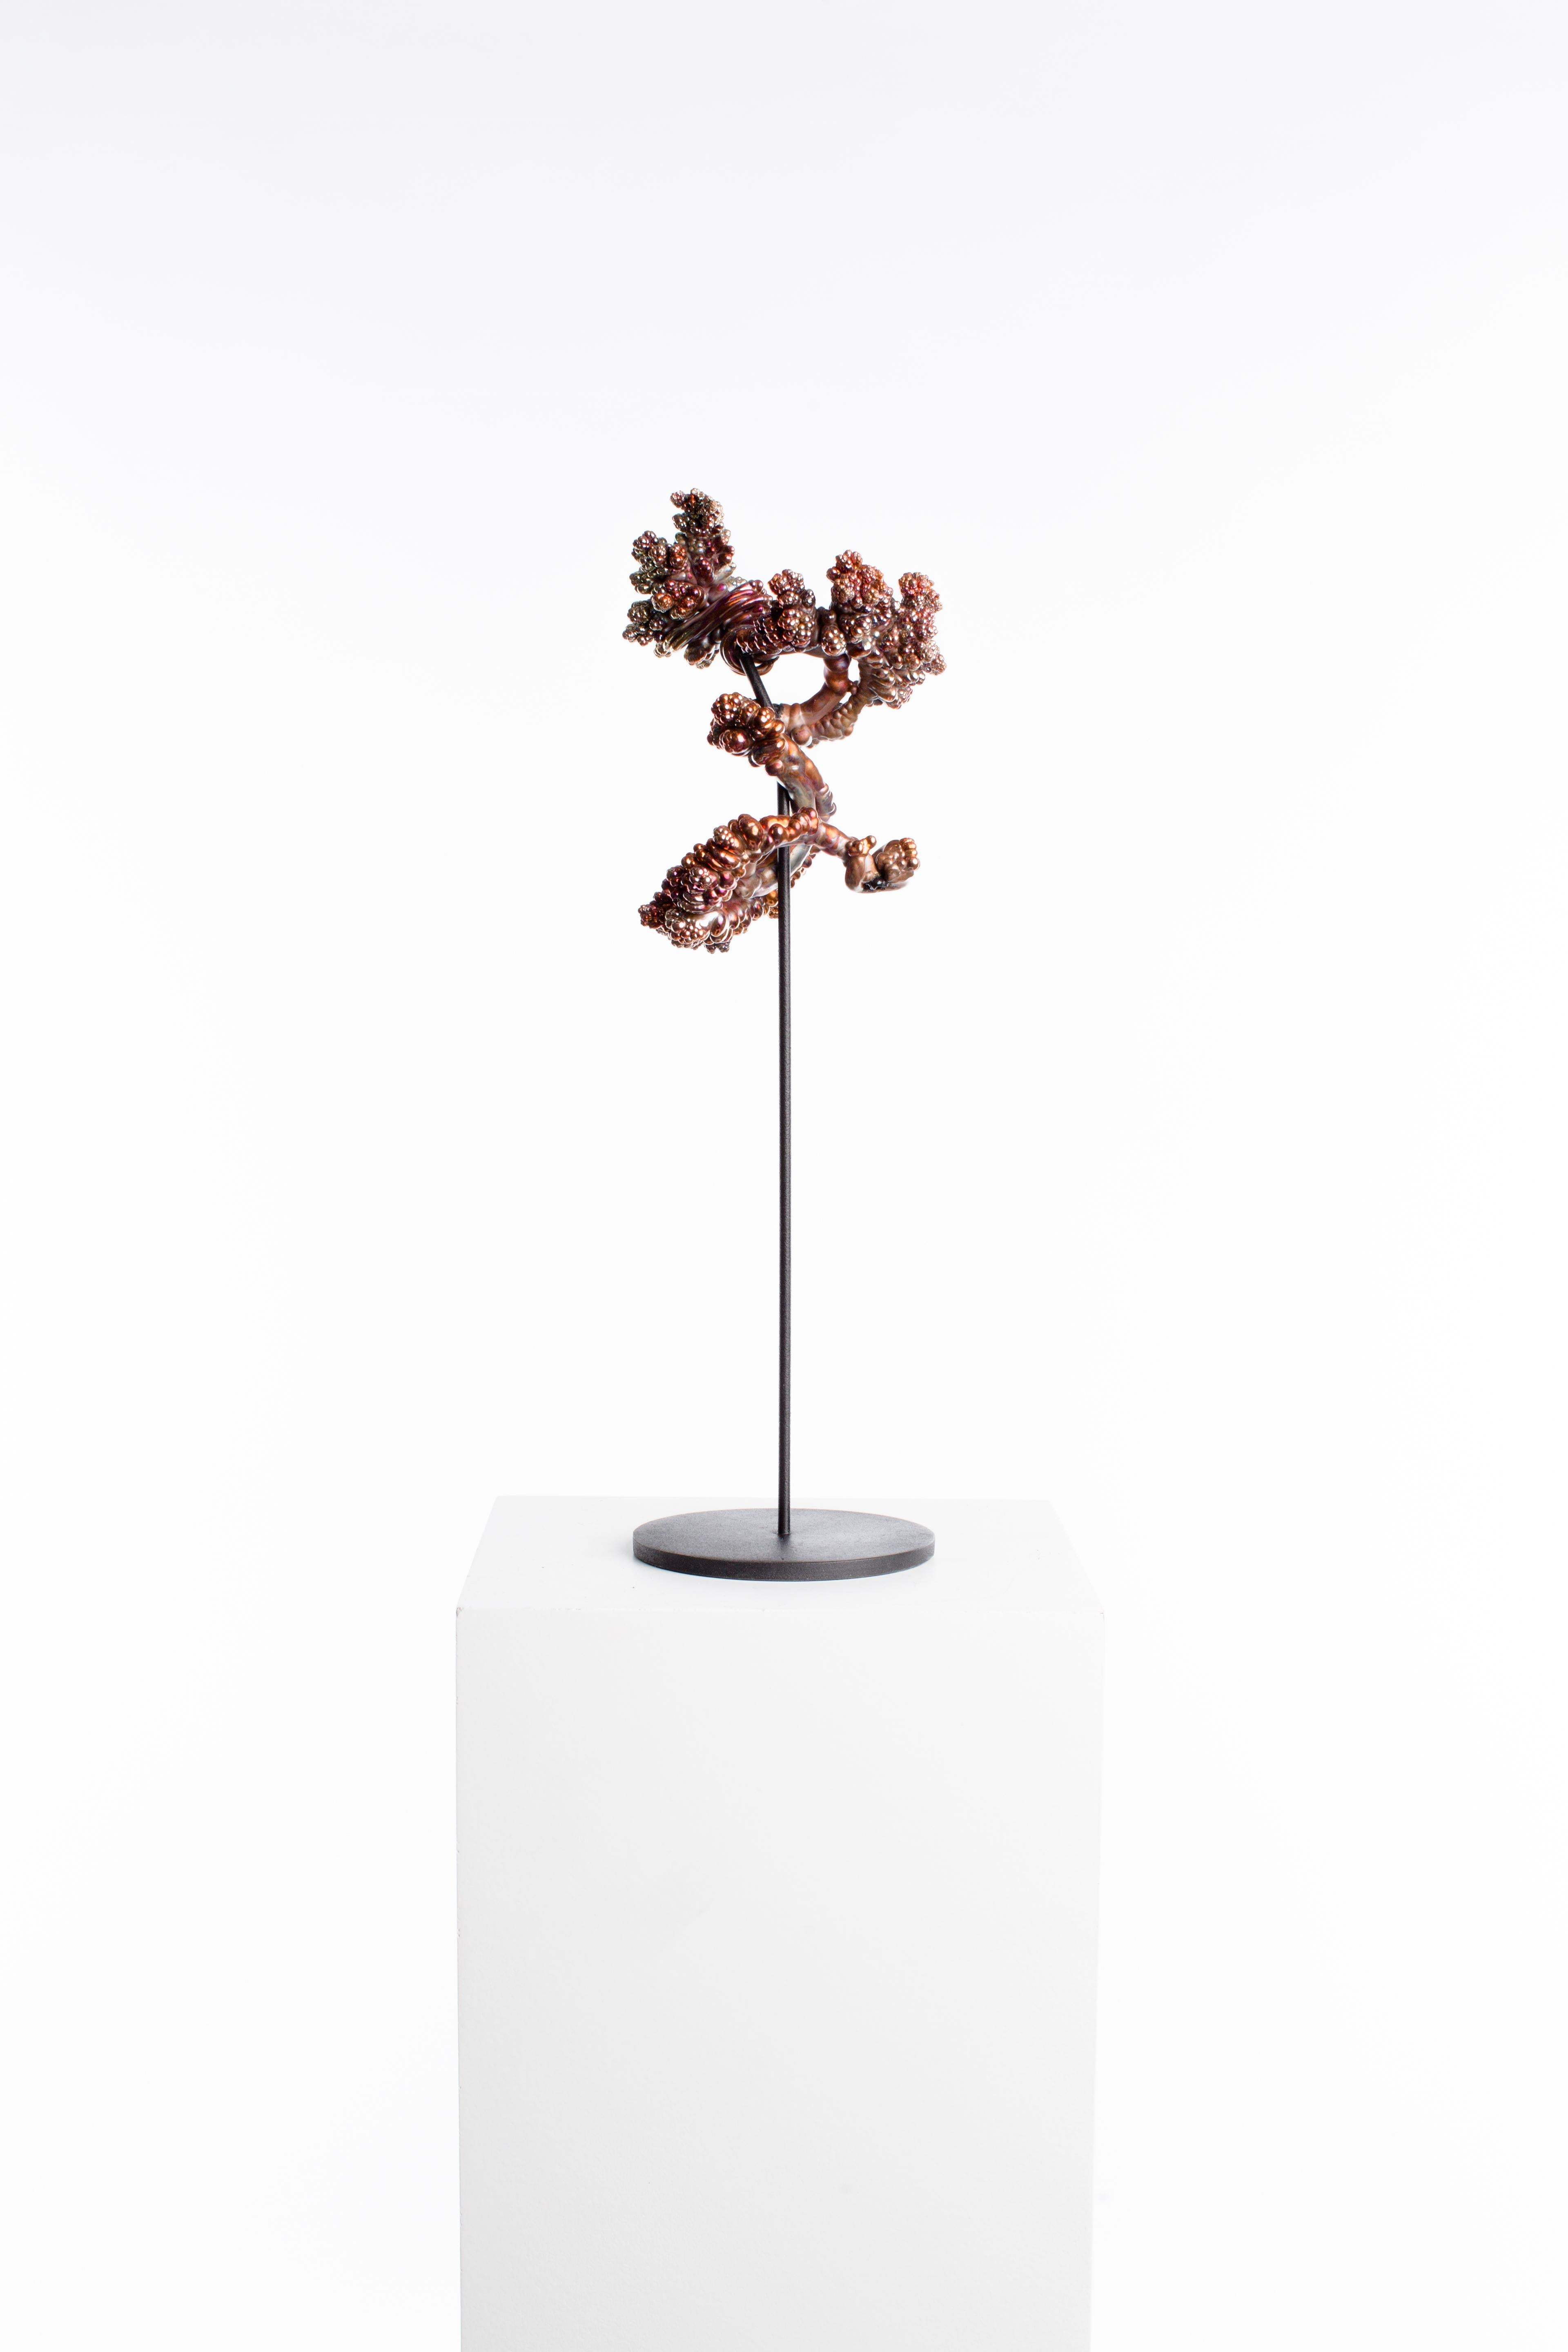 Copper, Crystal, Polished, Raw, Abstract, Contemporary, Modern, Art, Sculpture - Gray Abstract Sculpture by Driaan Claassen